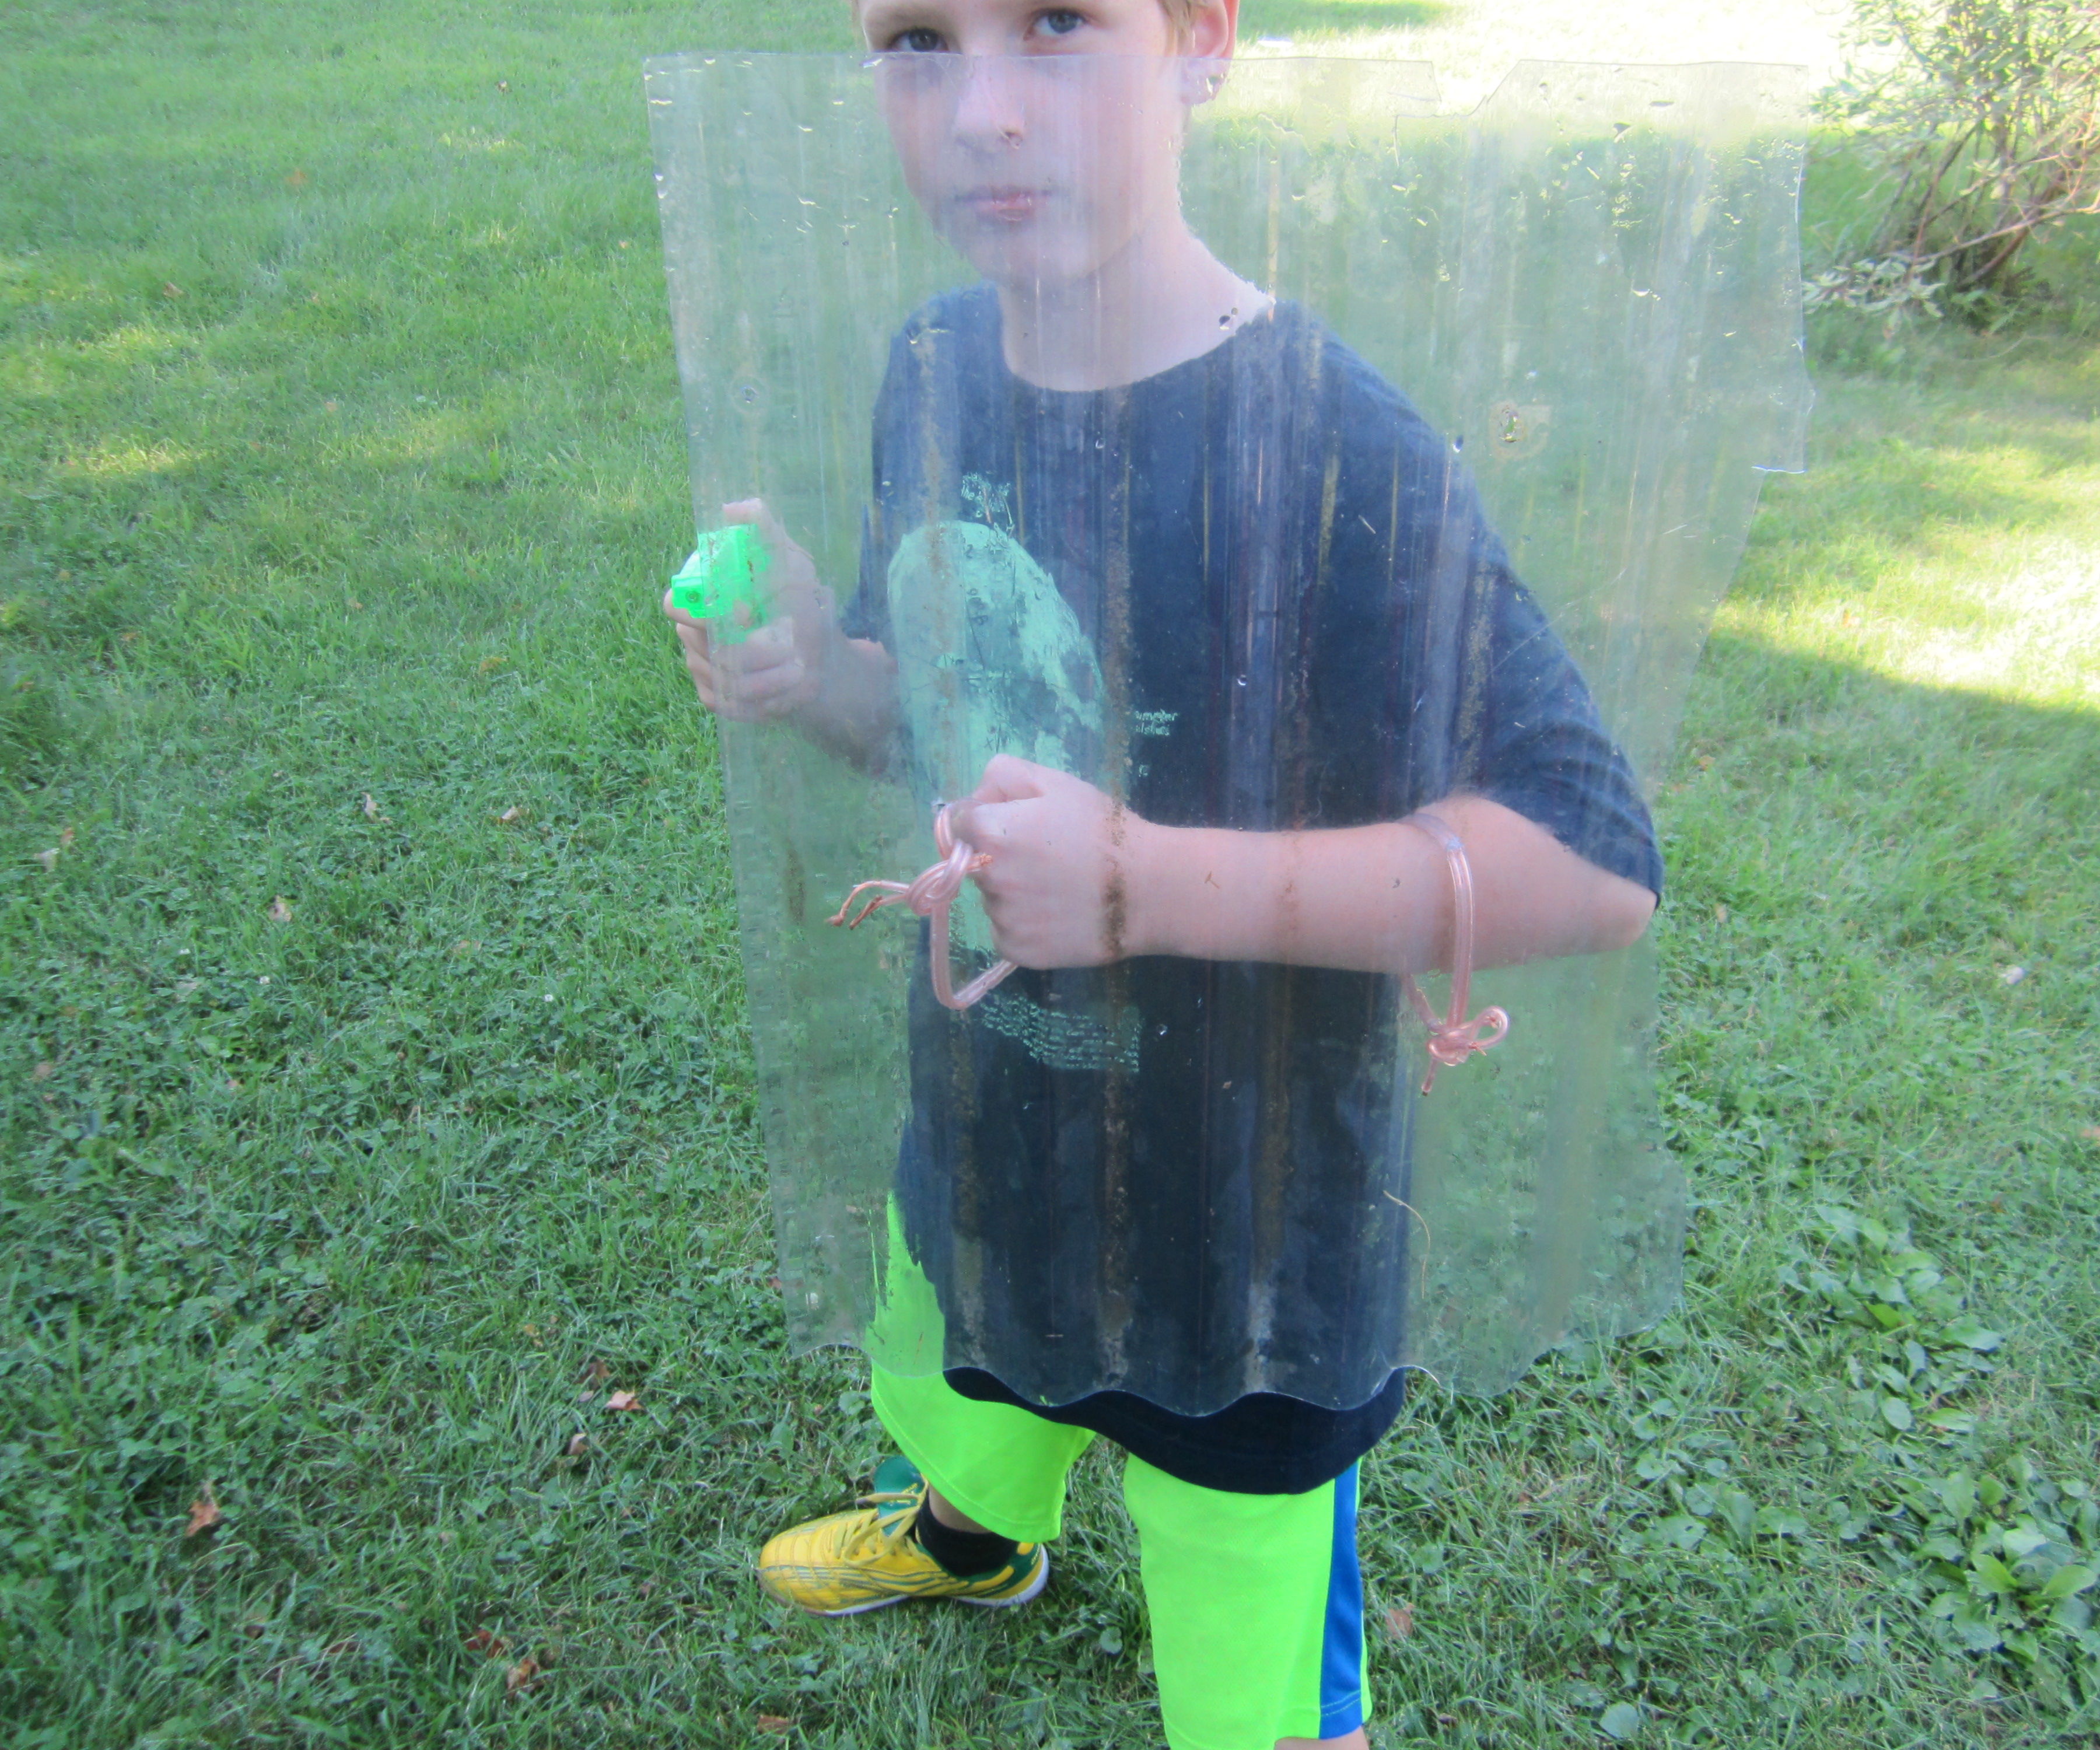 Cool Shield for Water Gun Fight (Bonus: How to Set Up a GREAT Water Gun Fight)